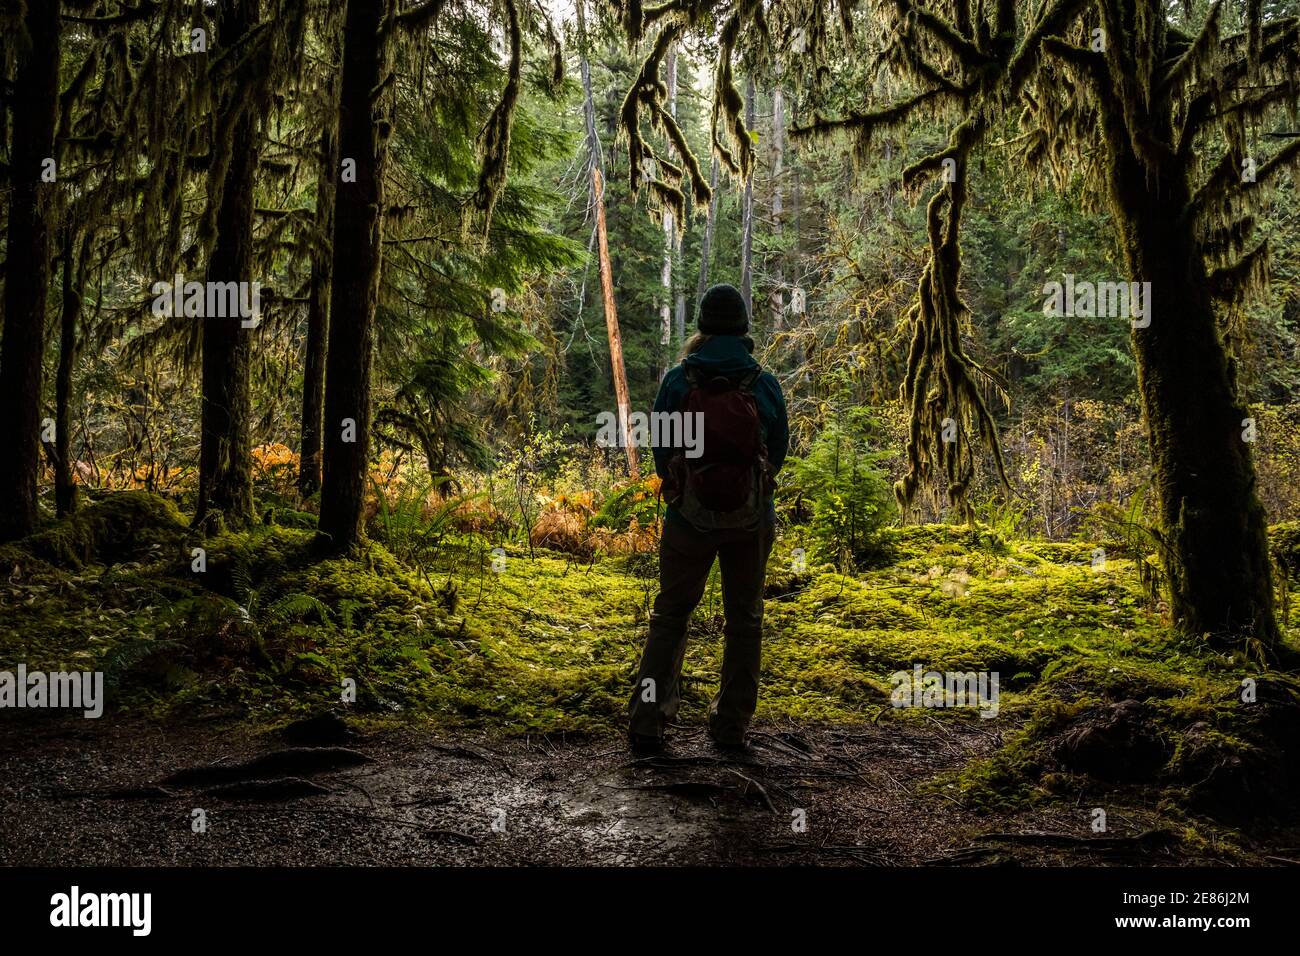 A woman taking in the lush views along the Skokomish river trail, Staircase Rapids area of Olympic National Park, Washington, USA. Stock Photo